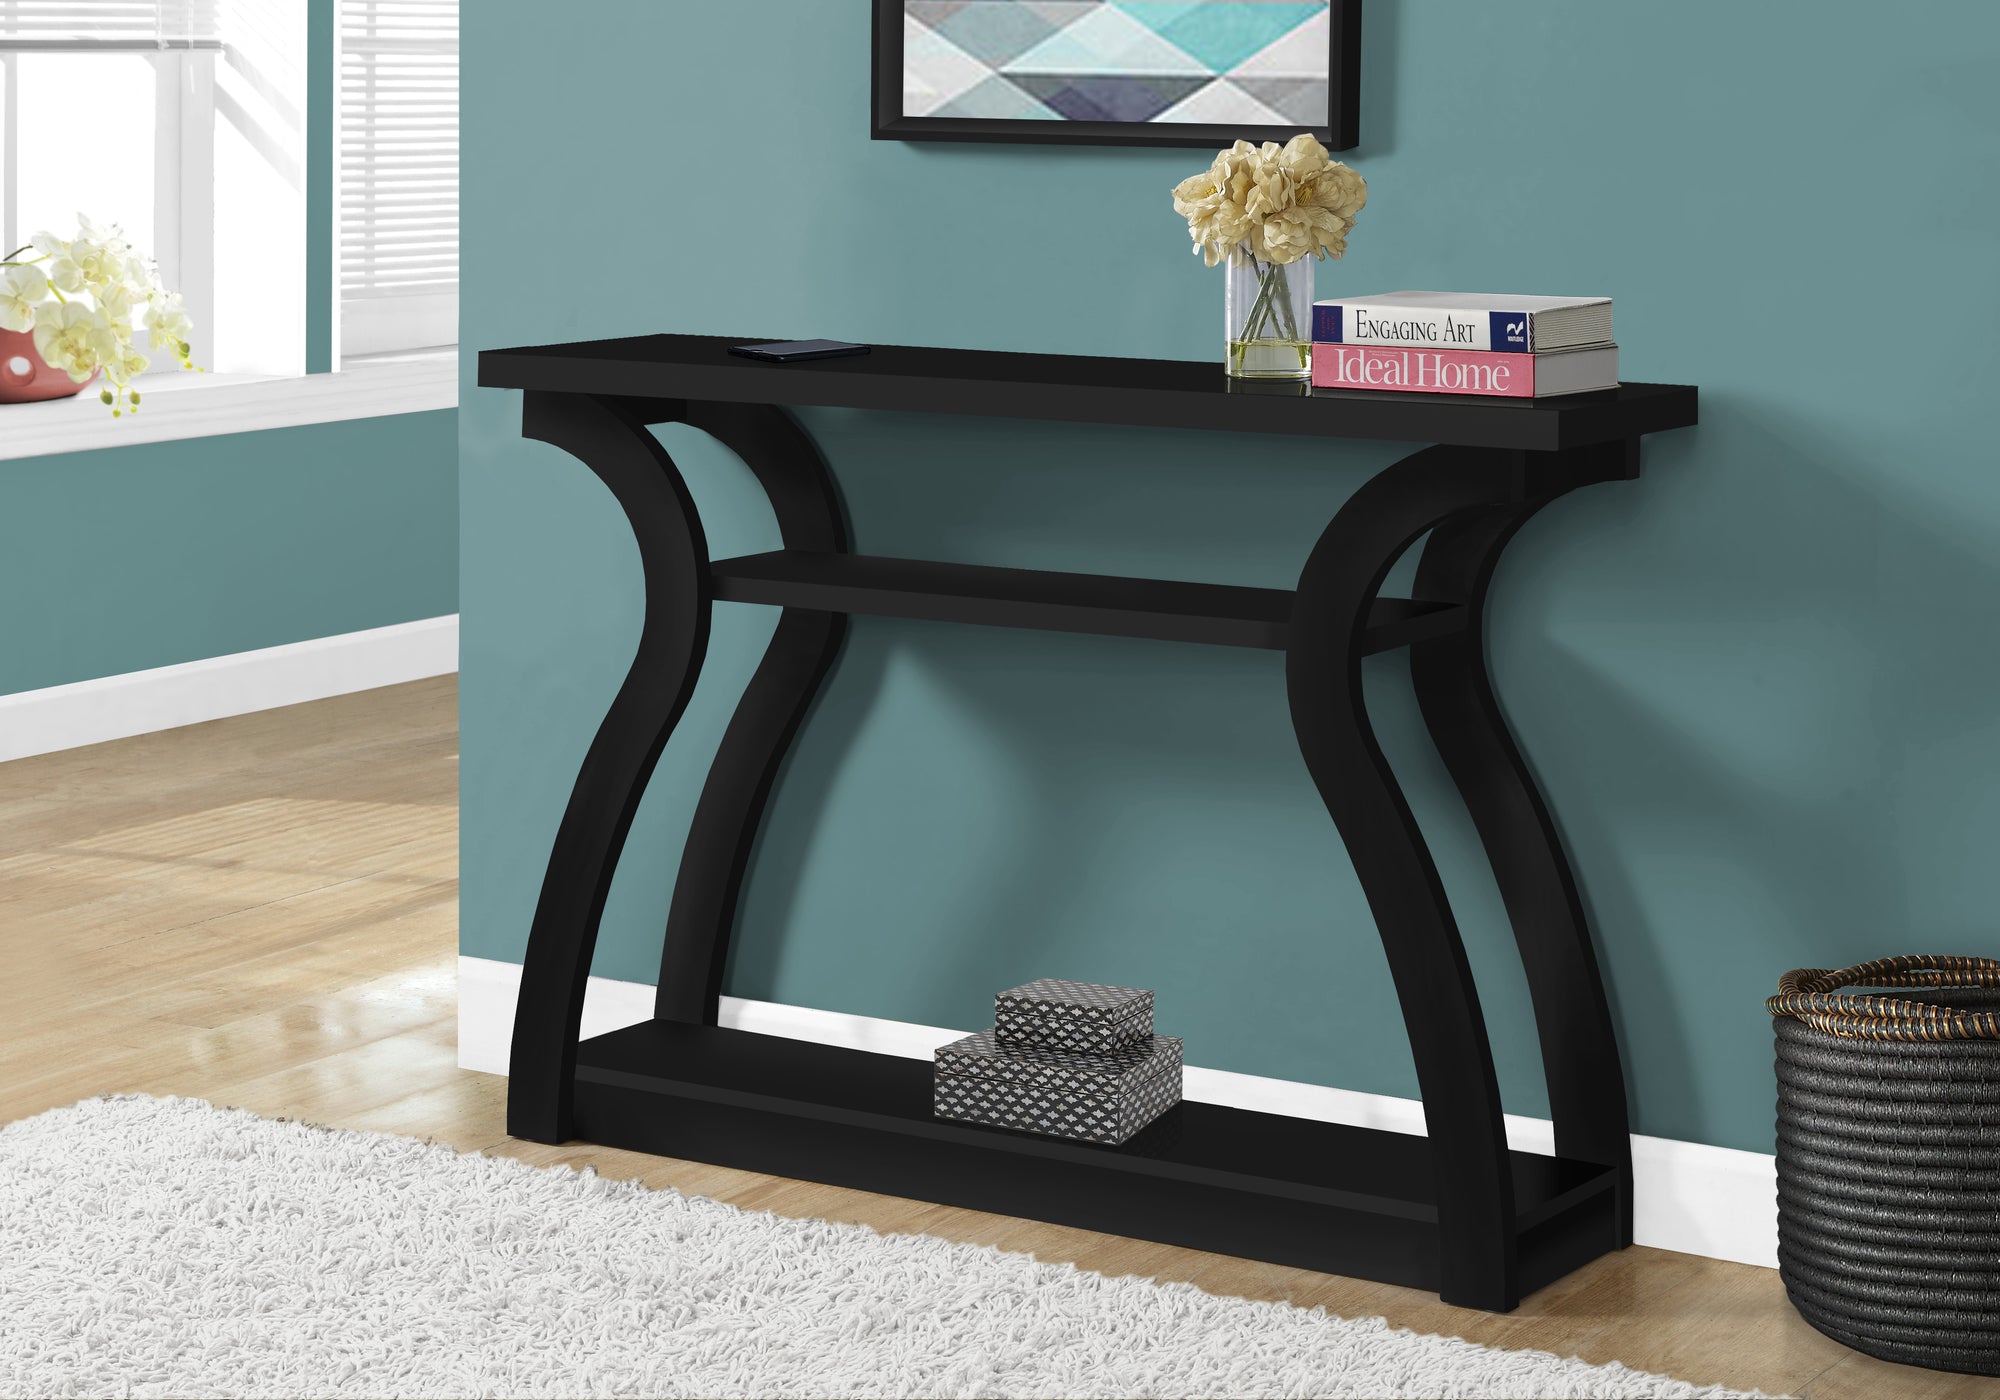 MN-212439    Accent Table, Console, Entryway, Narrow, Sofa, Living Room, Bedroom, Laminate, Black, Contemporary, Modern